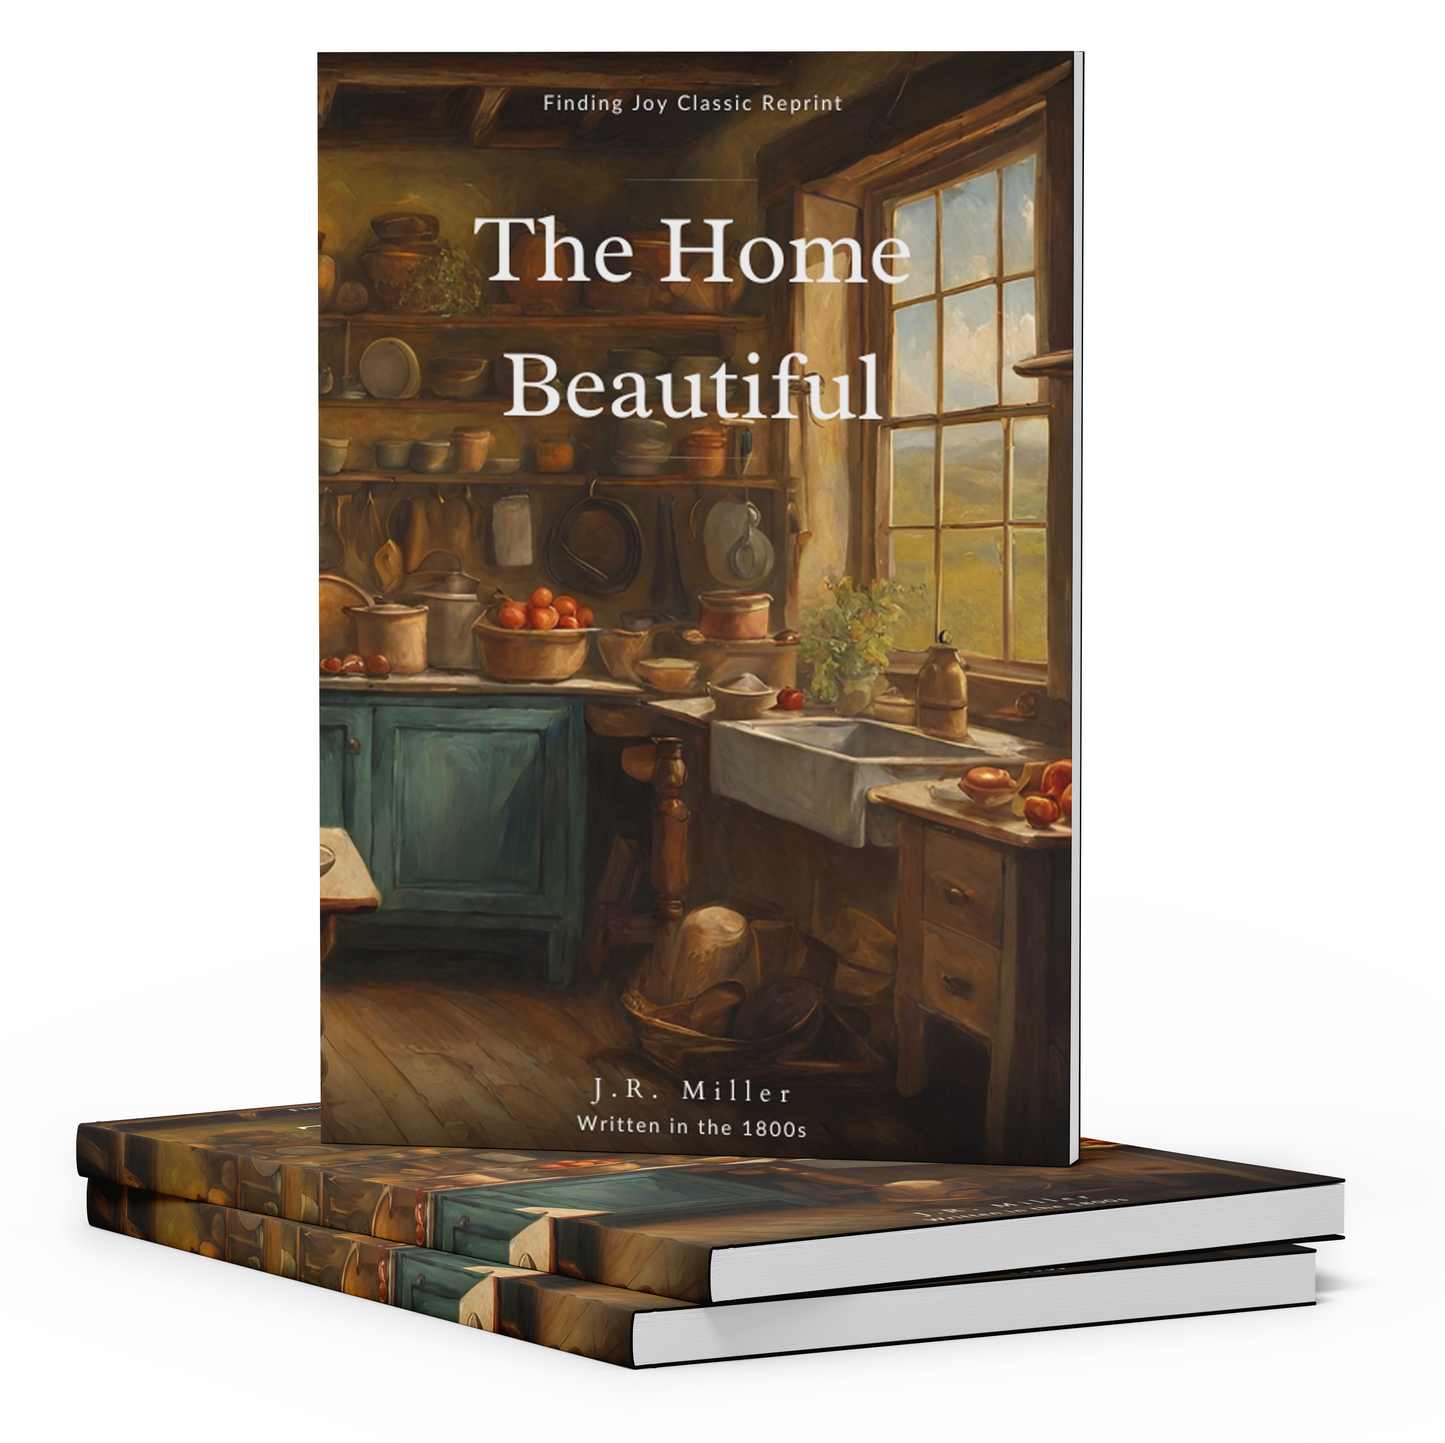 The Home Beautiful - J.R. Miller